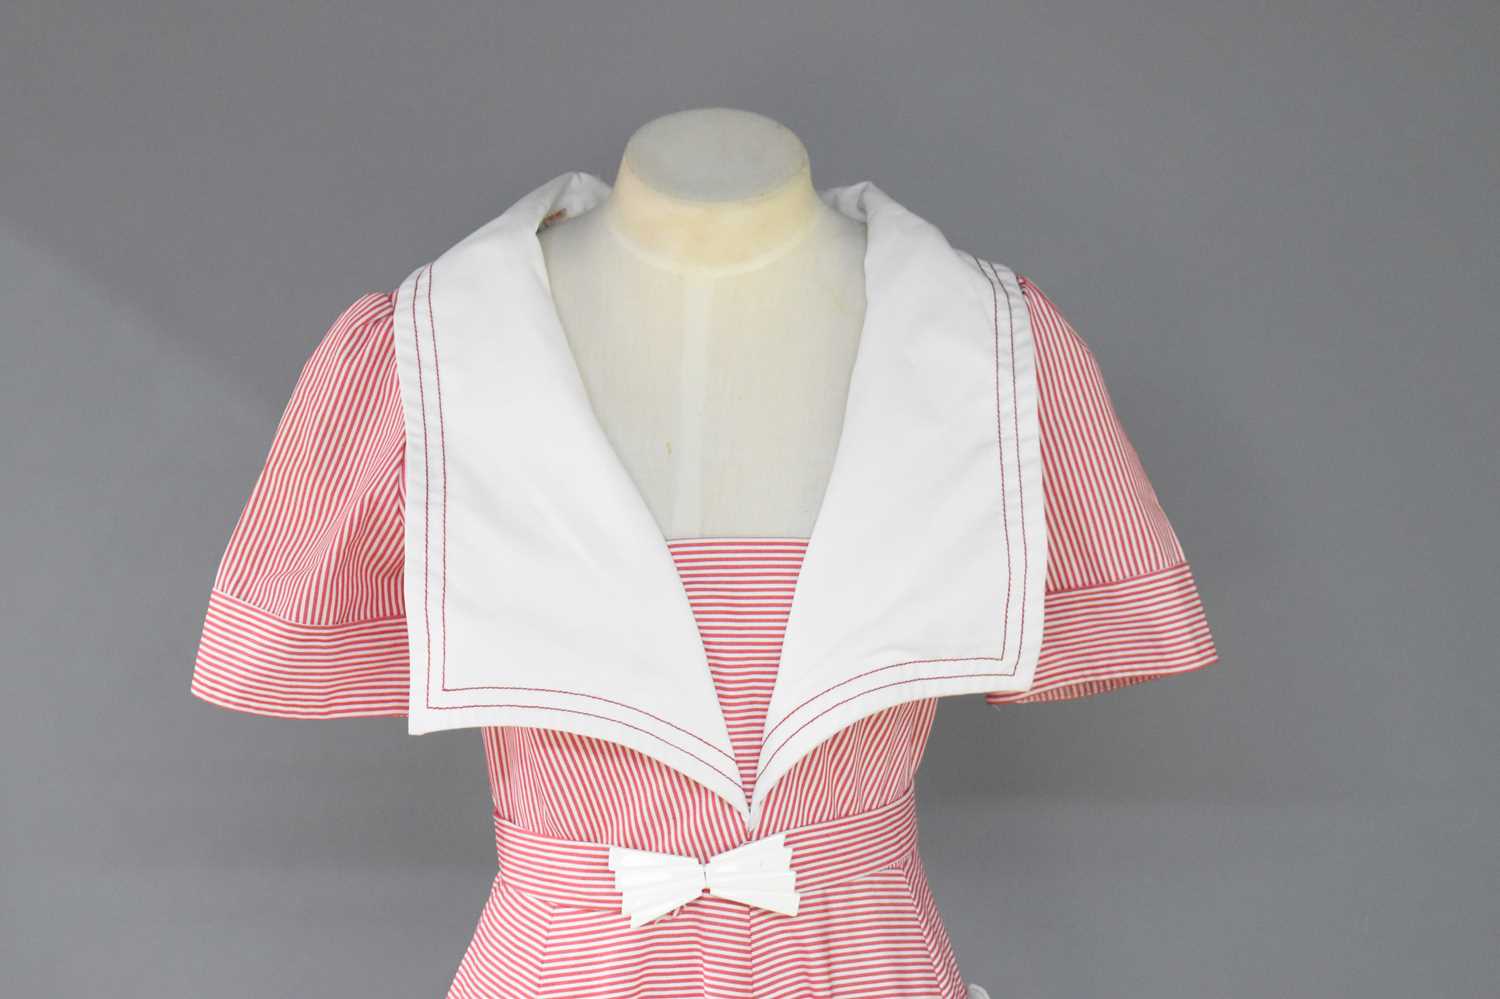 A vintage John Bates, "Jean Varon" red and white striped dress, original label inside, size 14, with - Image 2 of 2